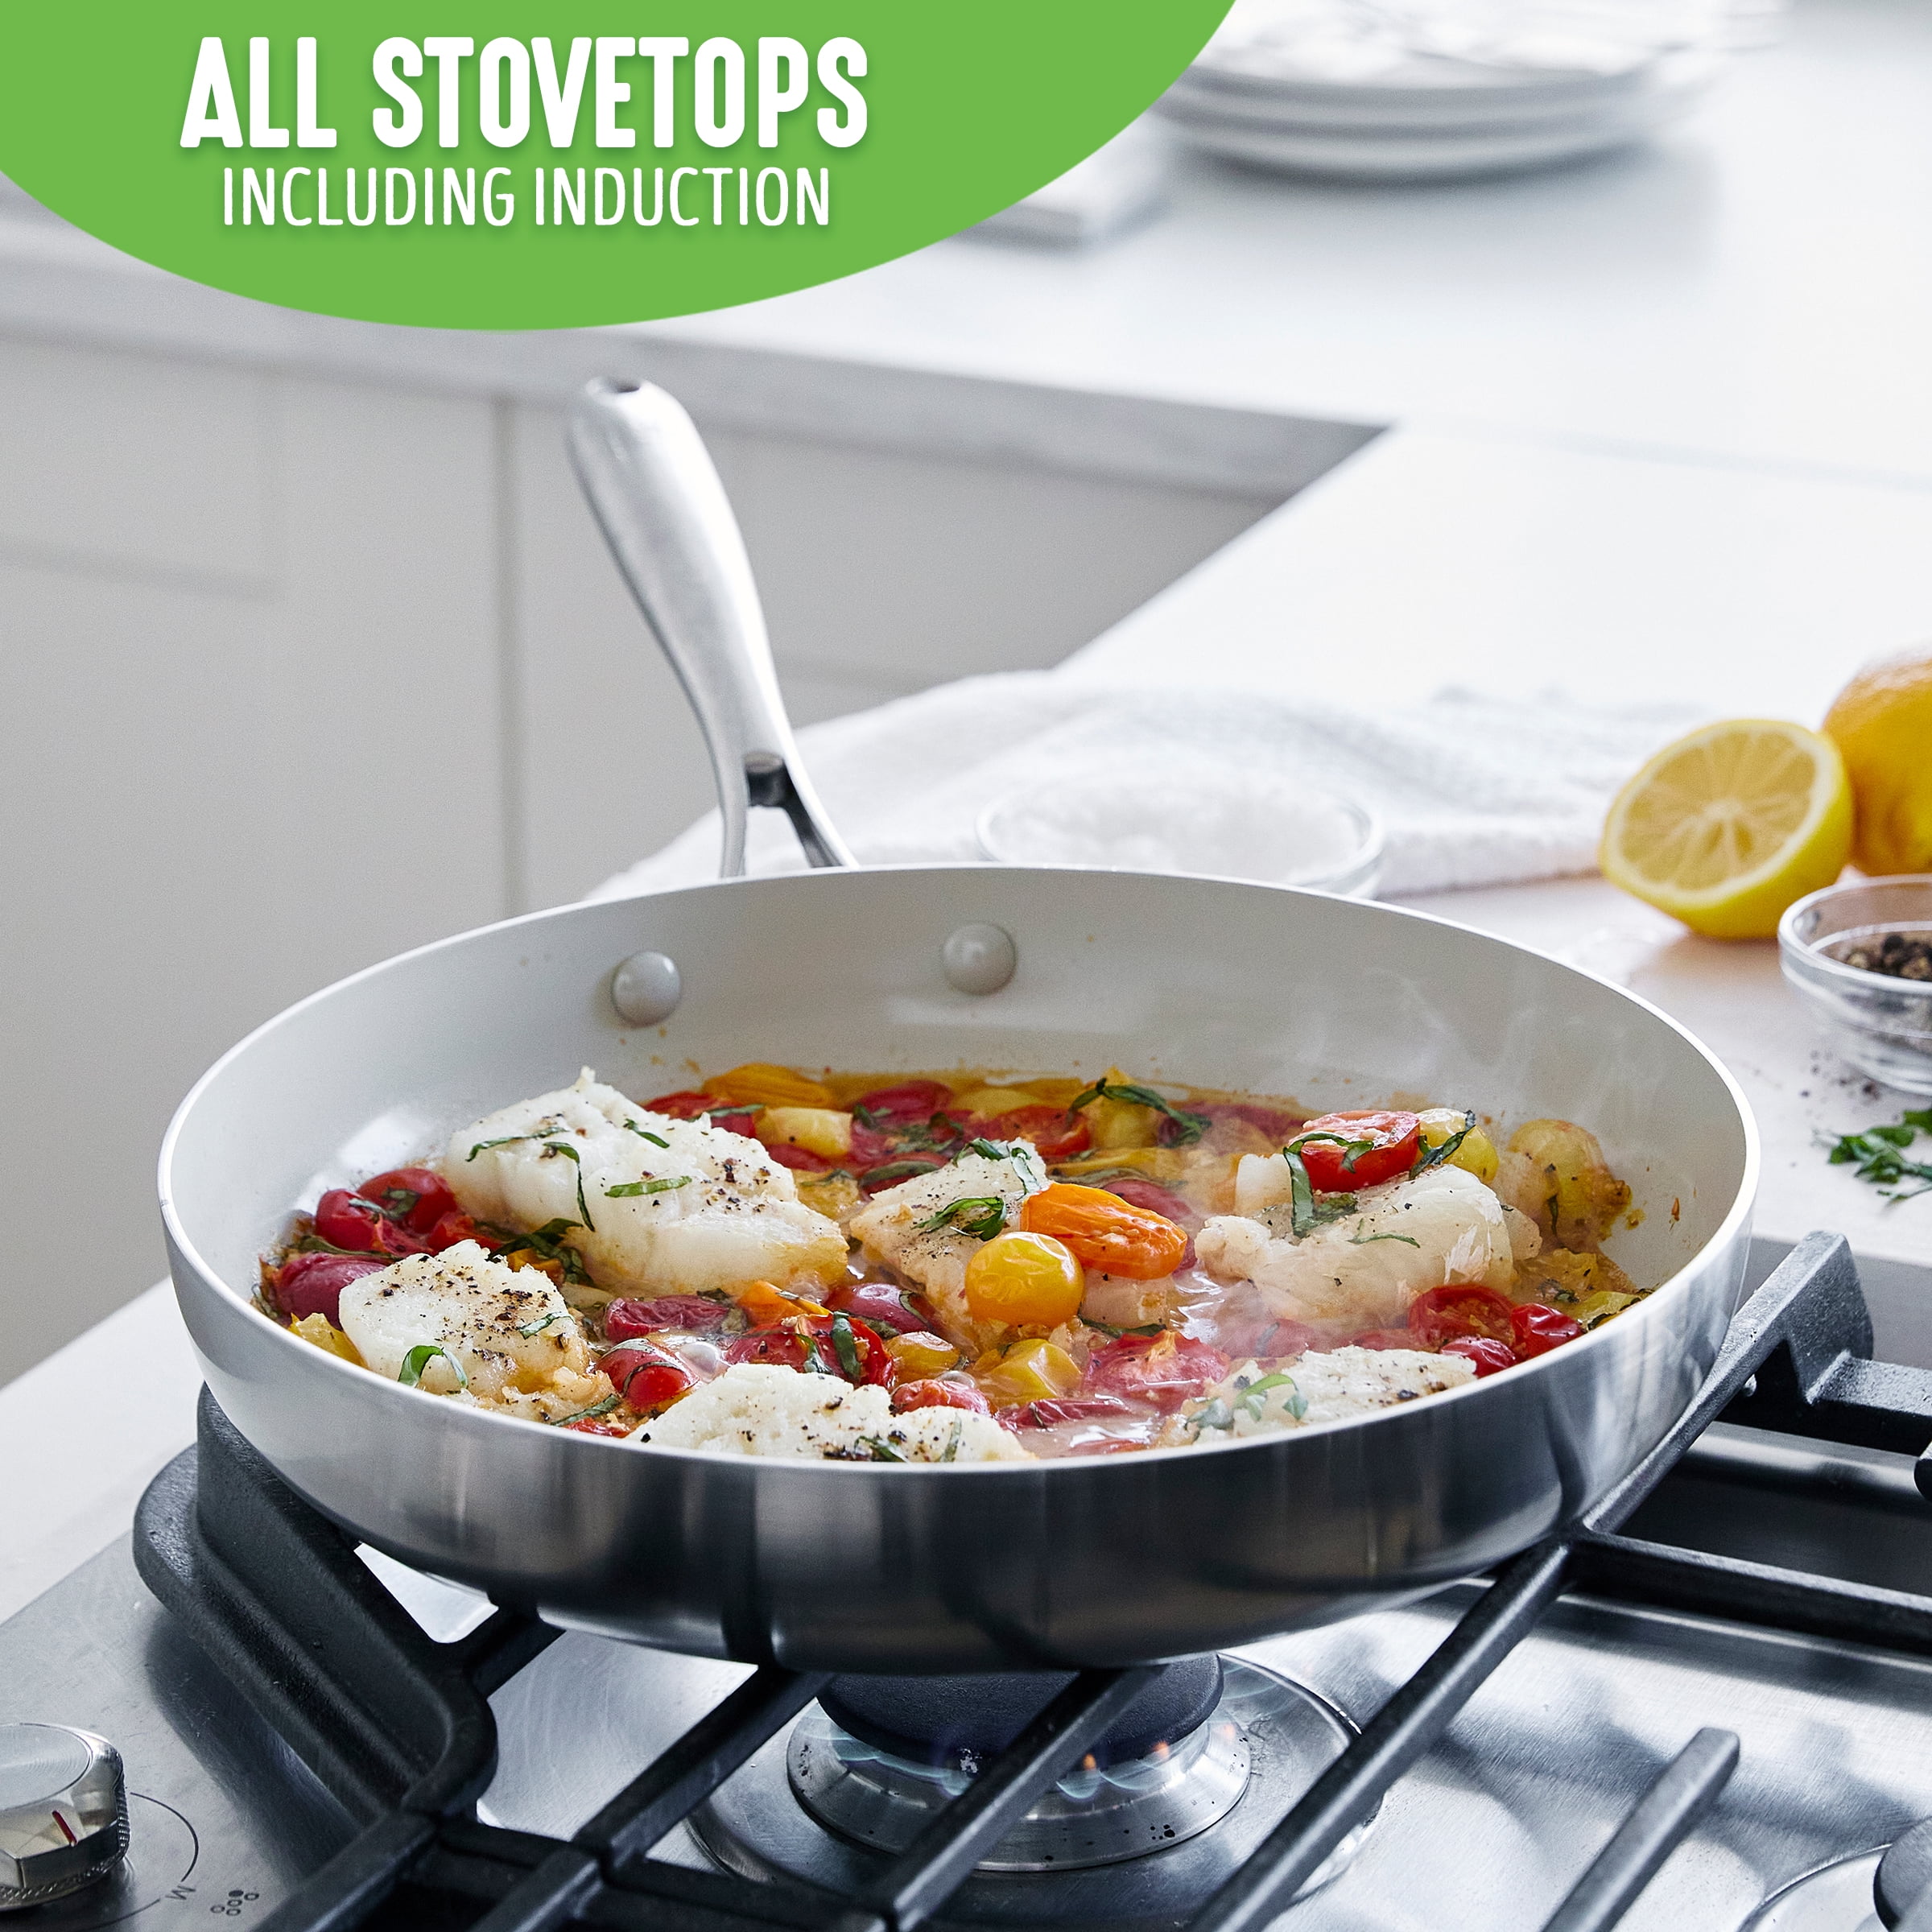 All-Clad Collective d5 Stainless-Steel Nonstick 8 & 10 Frying